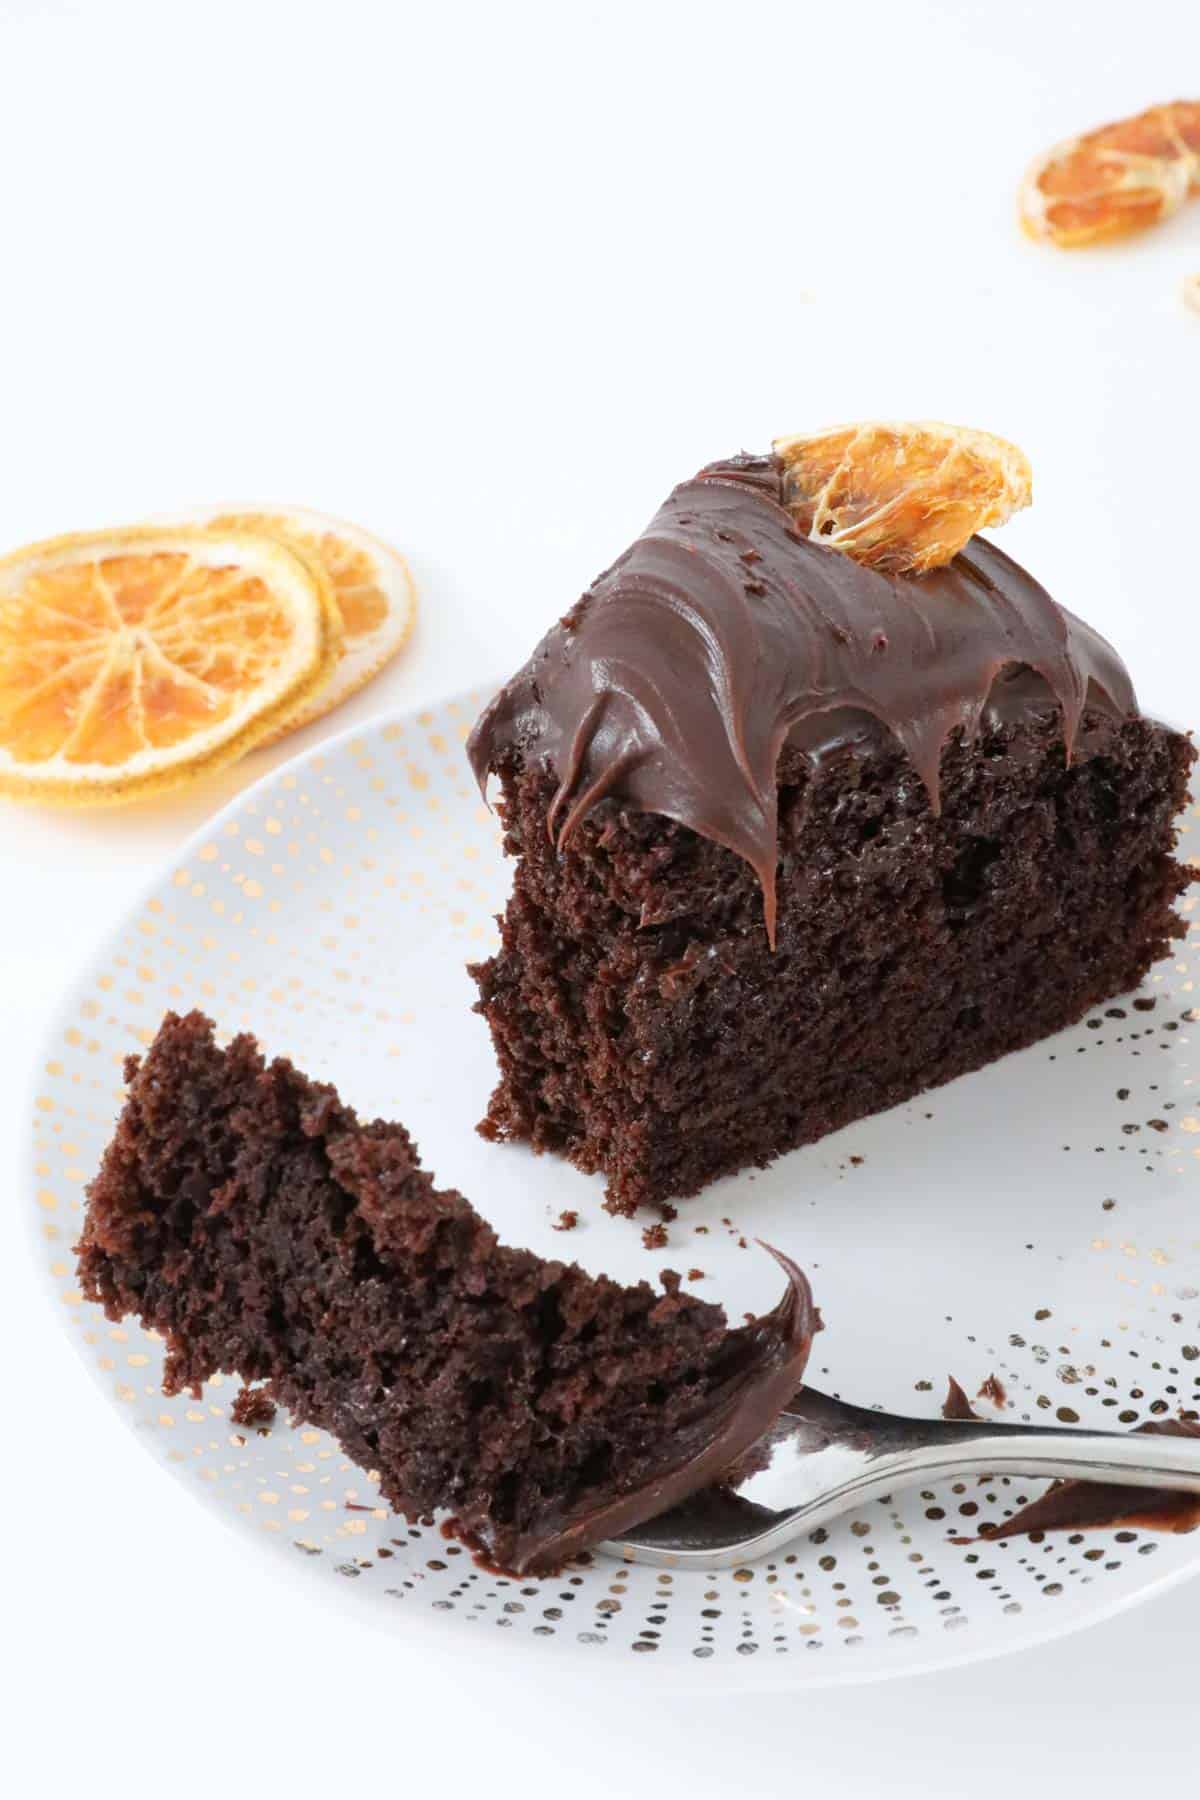 A slice of dense chocolate cake topped with ganache and dried orange slices.